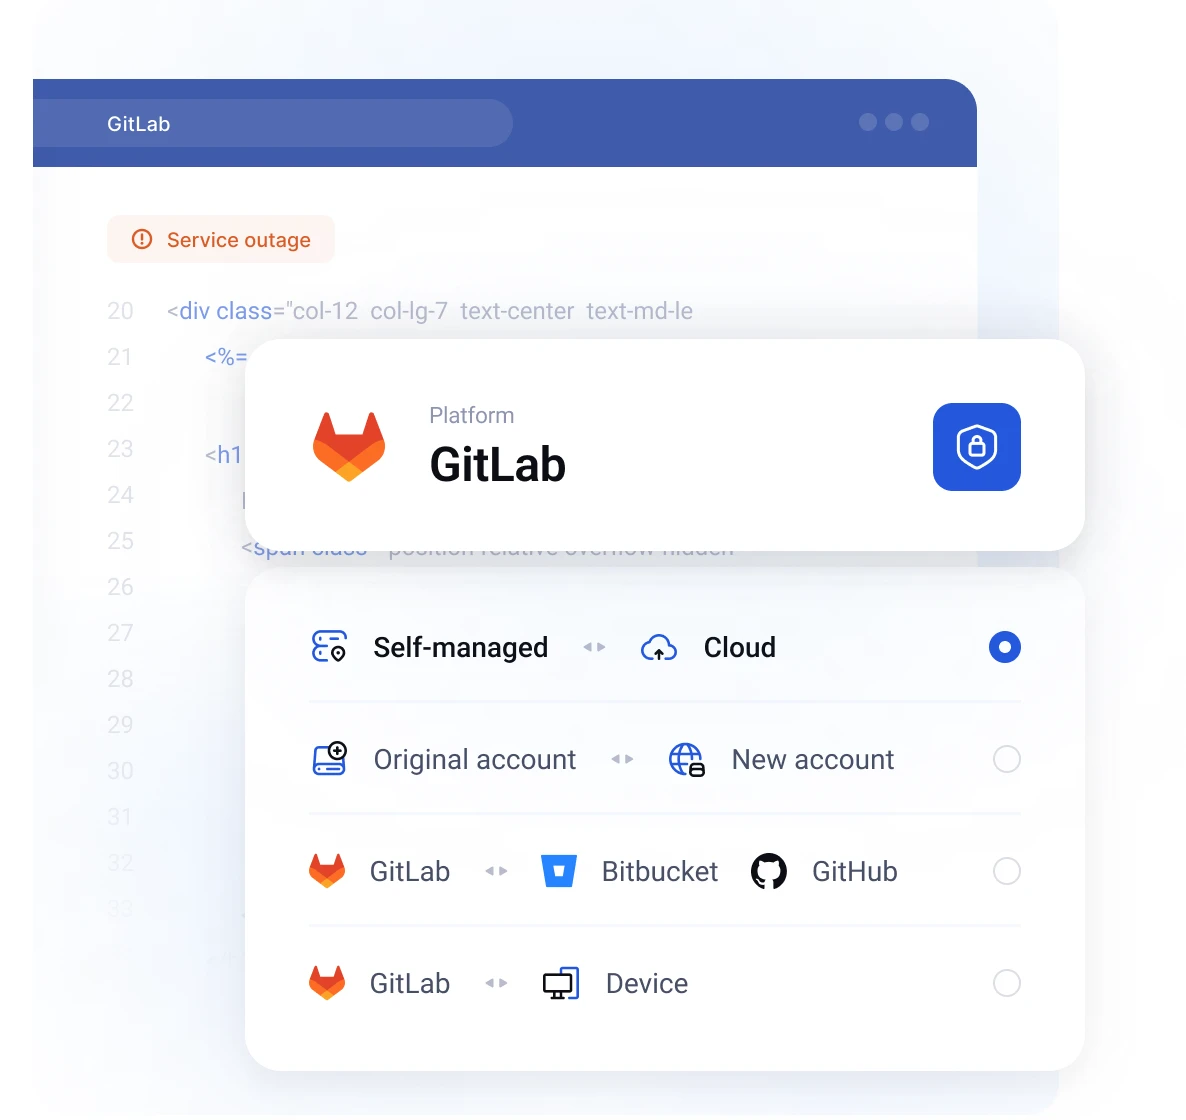 GitLab Data Migration and Mobility